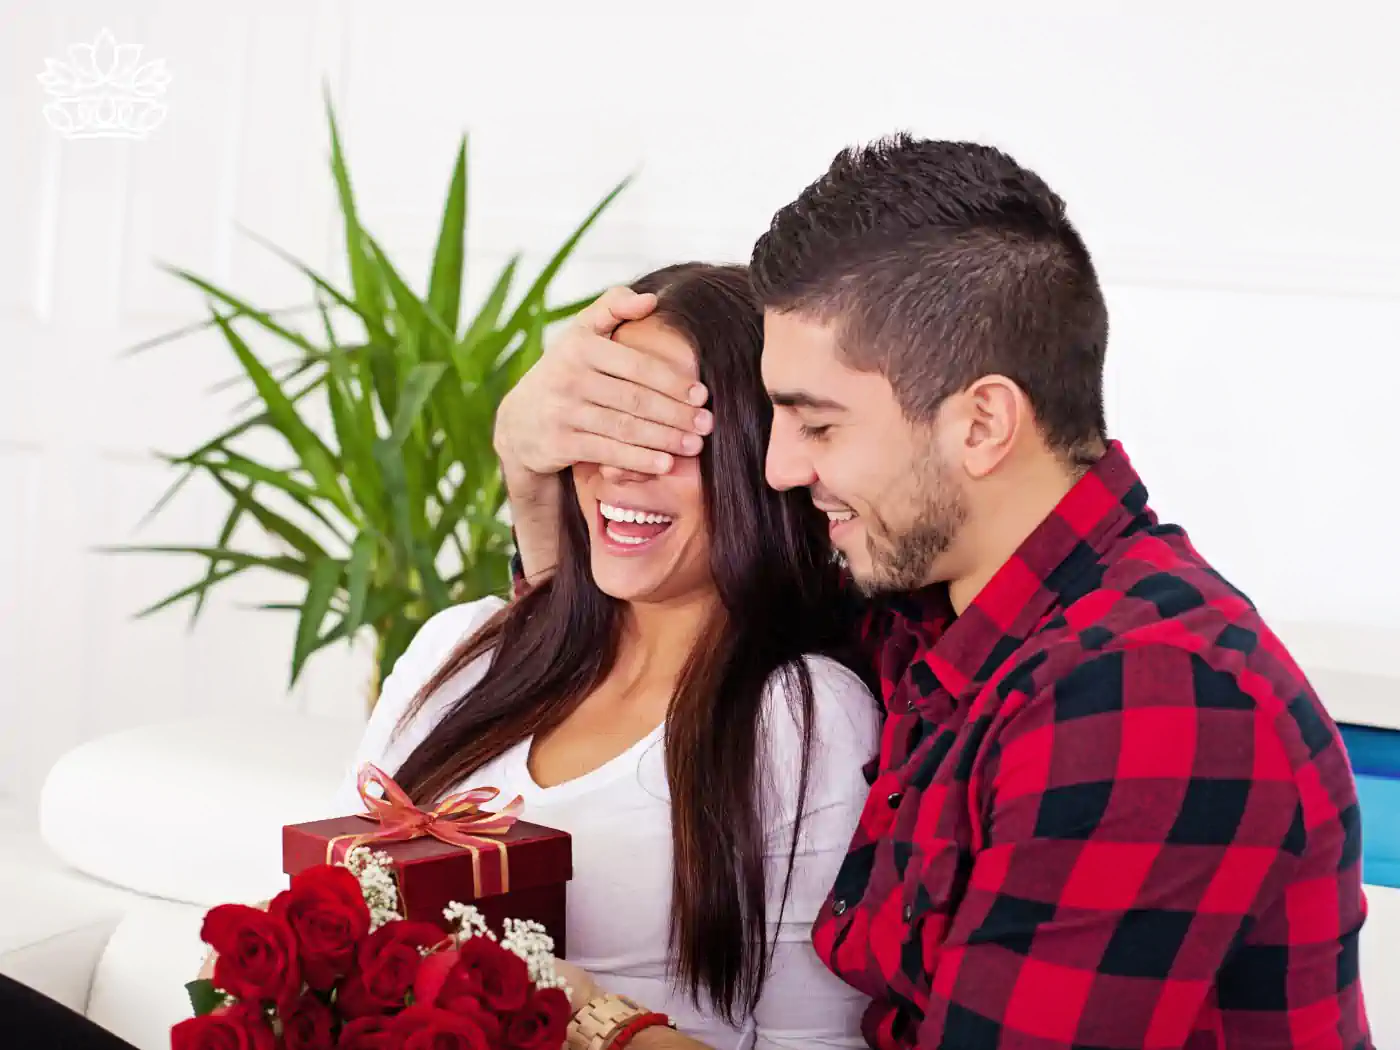 A romantic moment as a man surprises his partner with a bouquet of roses and a gift, emphasizing the joy of romantic gestures. Fabulous Flowers and Gifts.